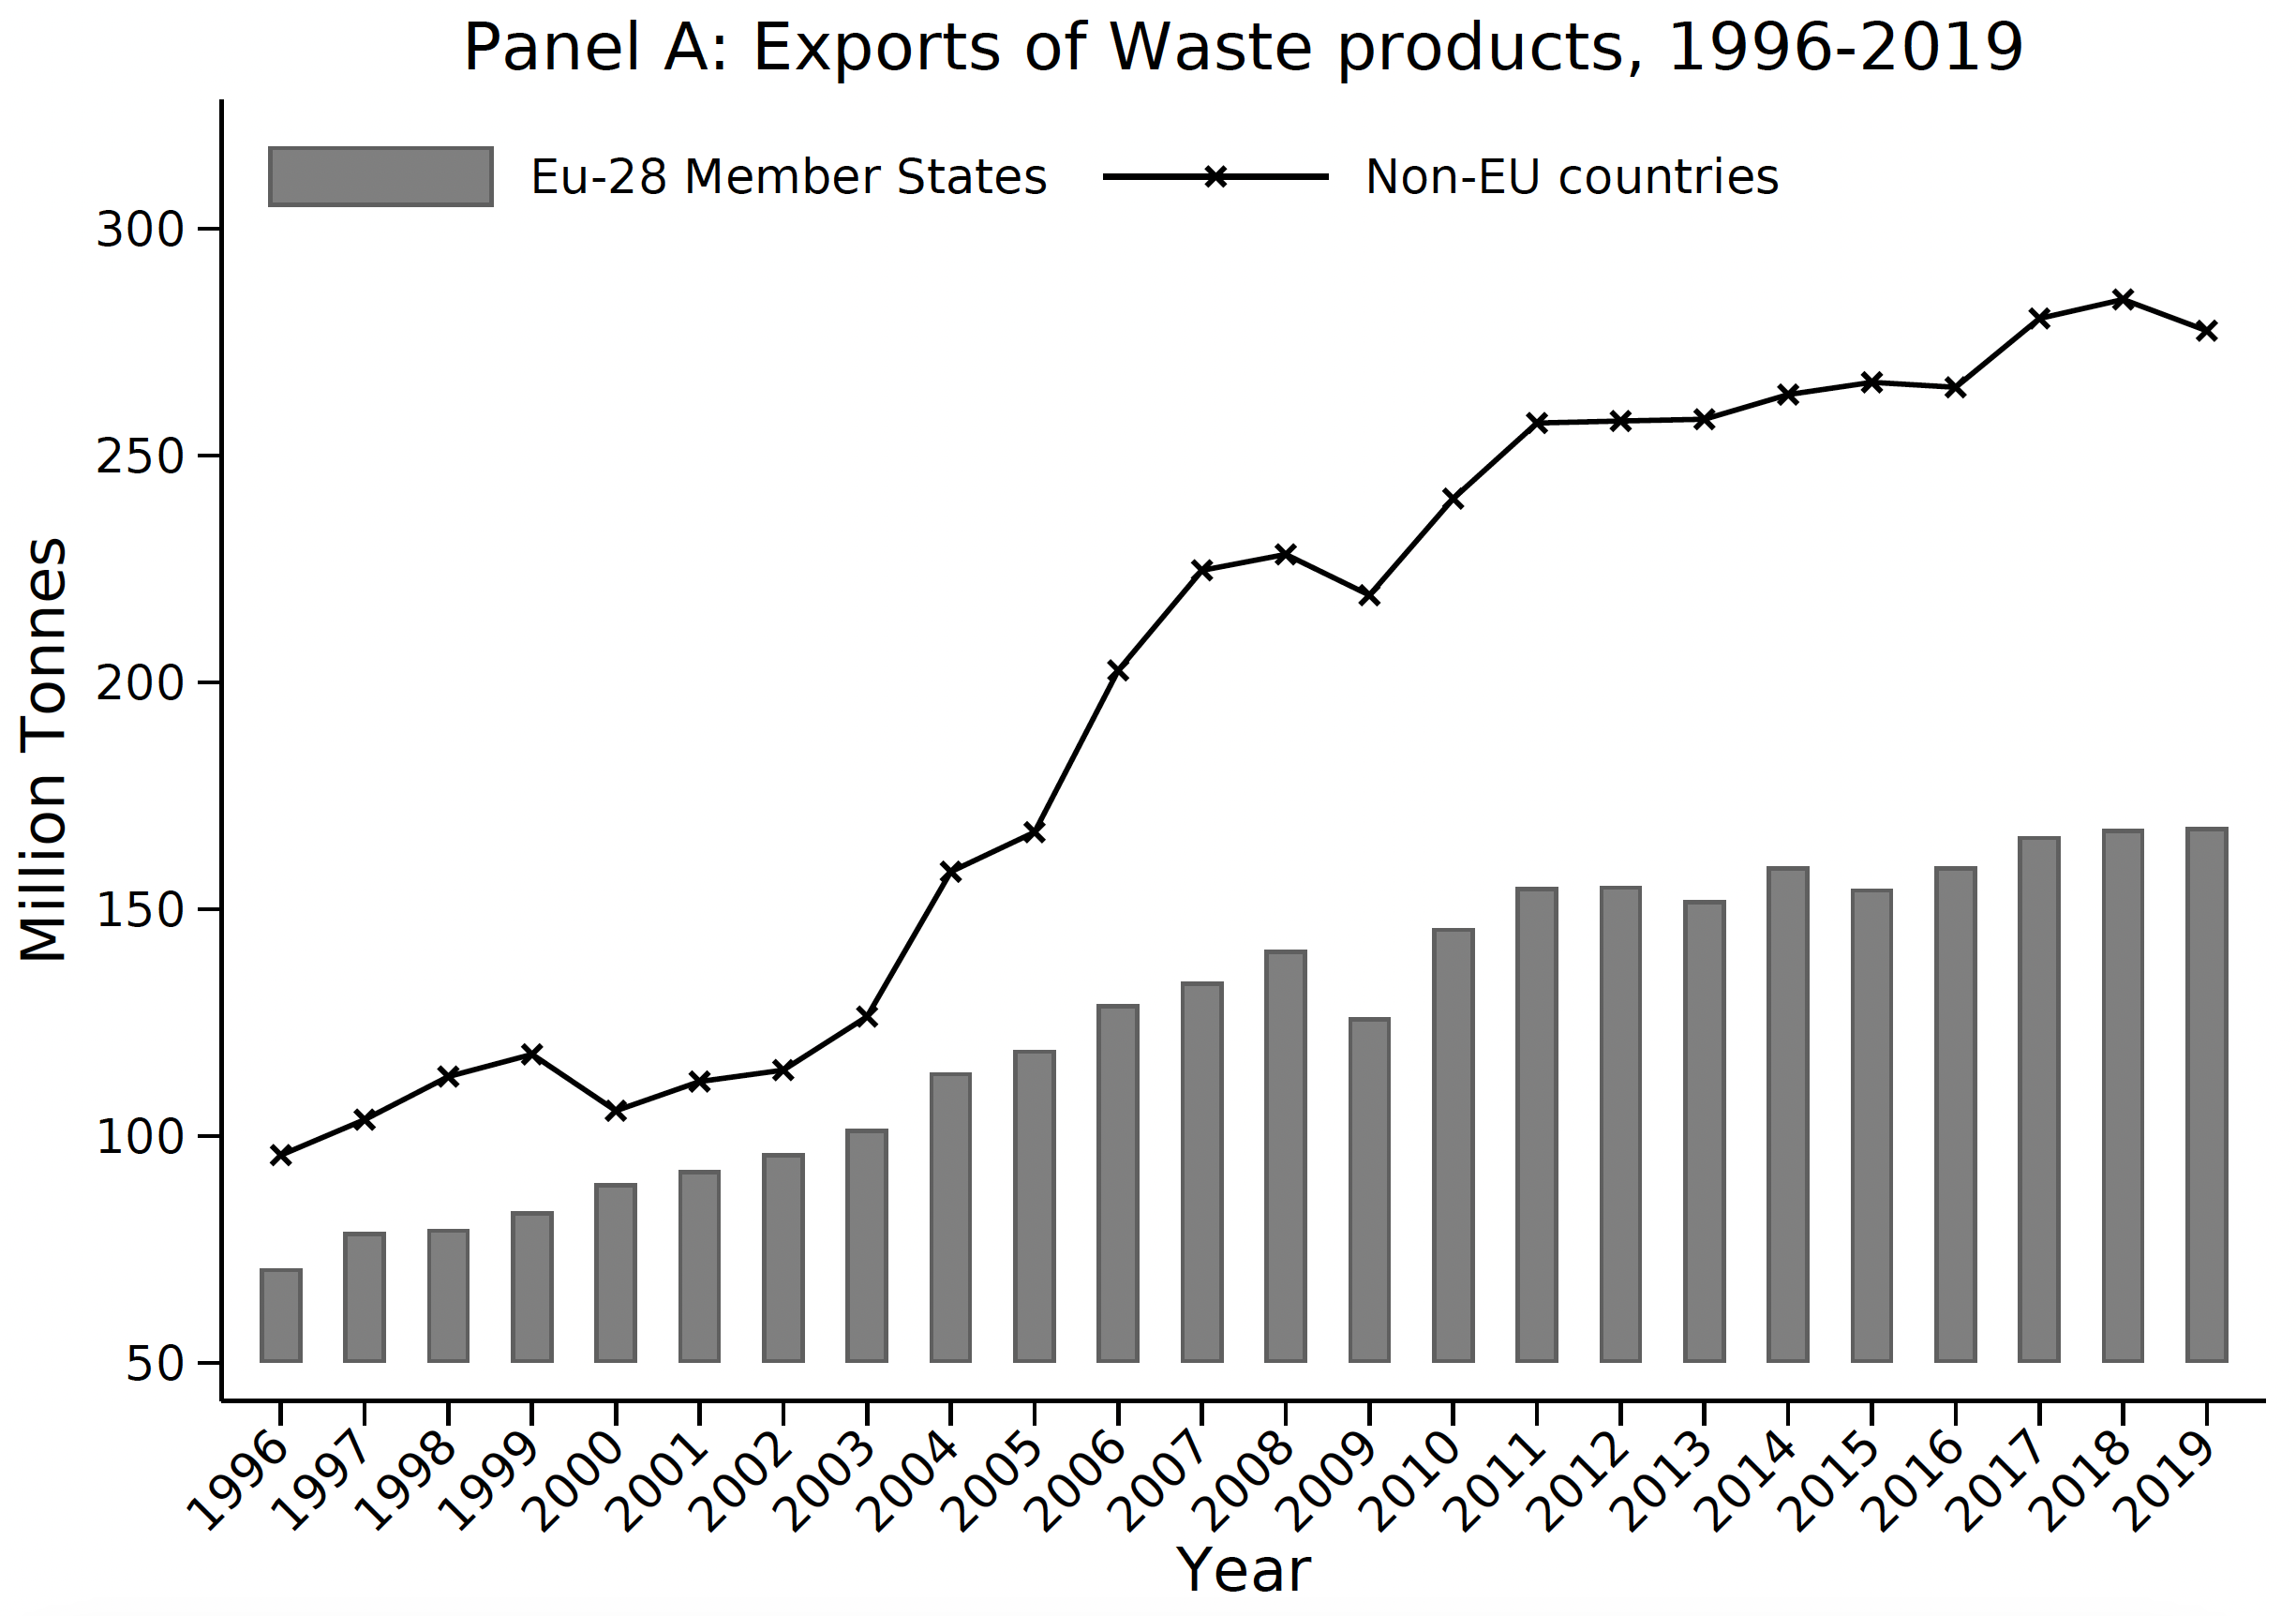 Figure 2a Exports of Waste products, 1996-2019